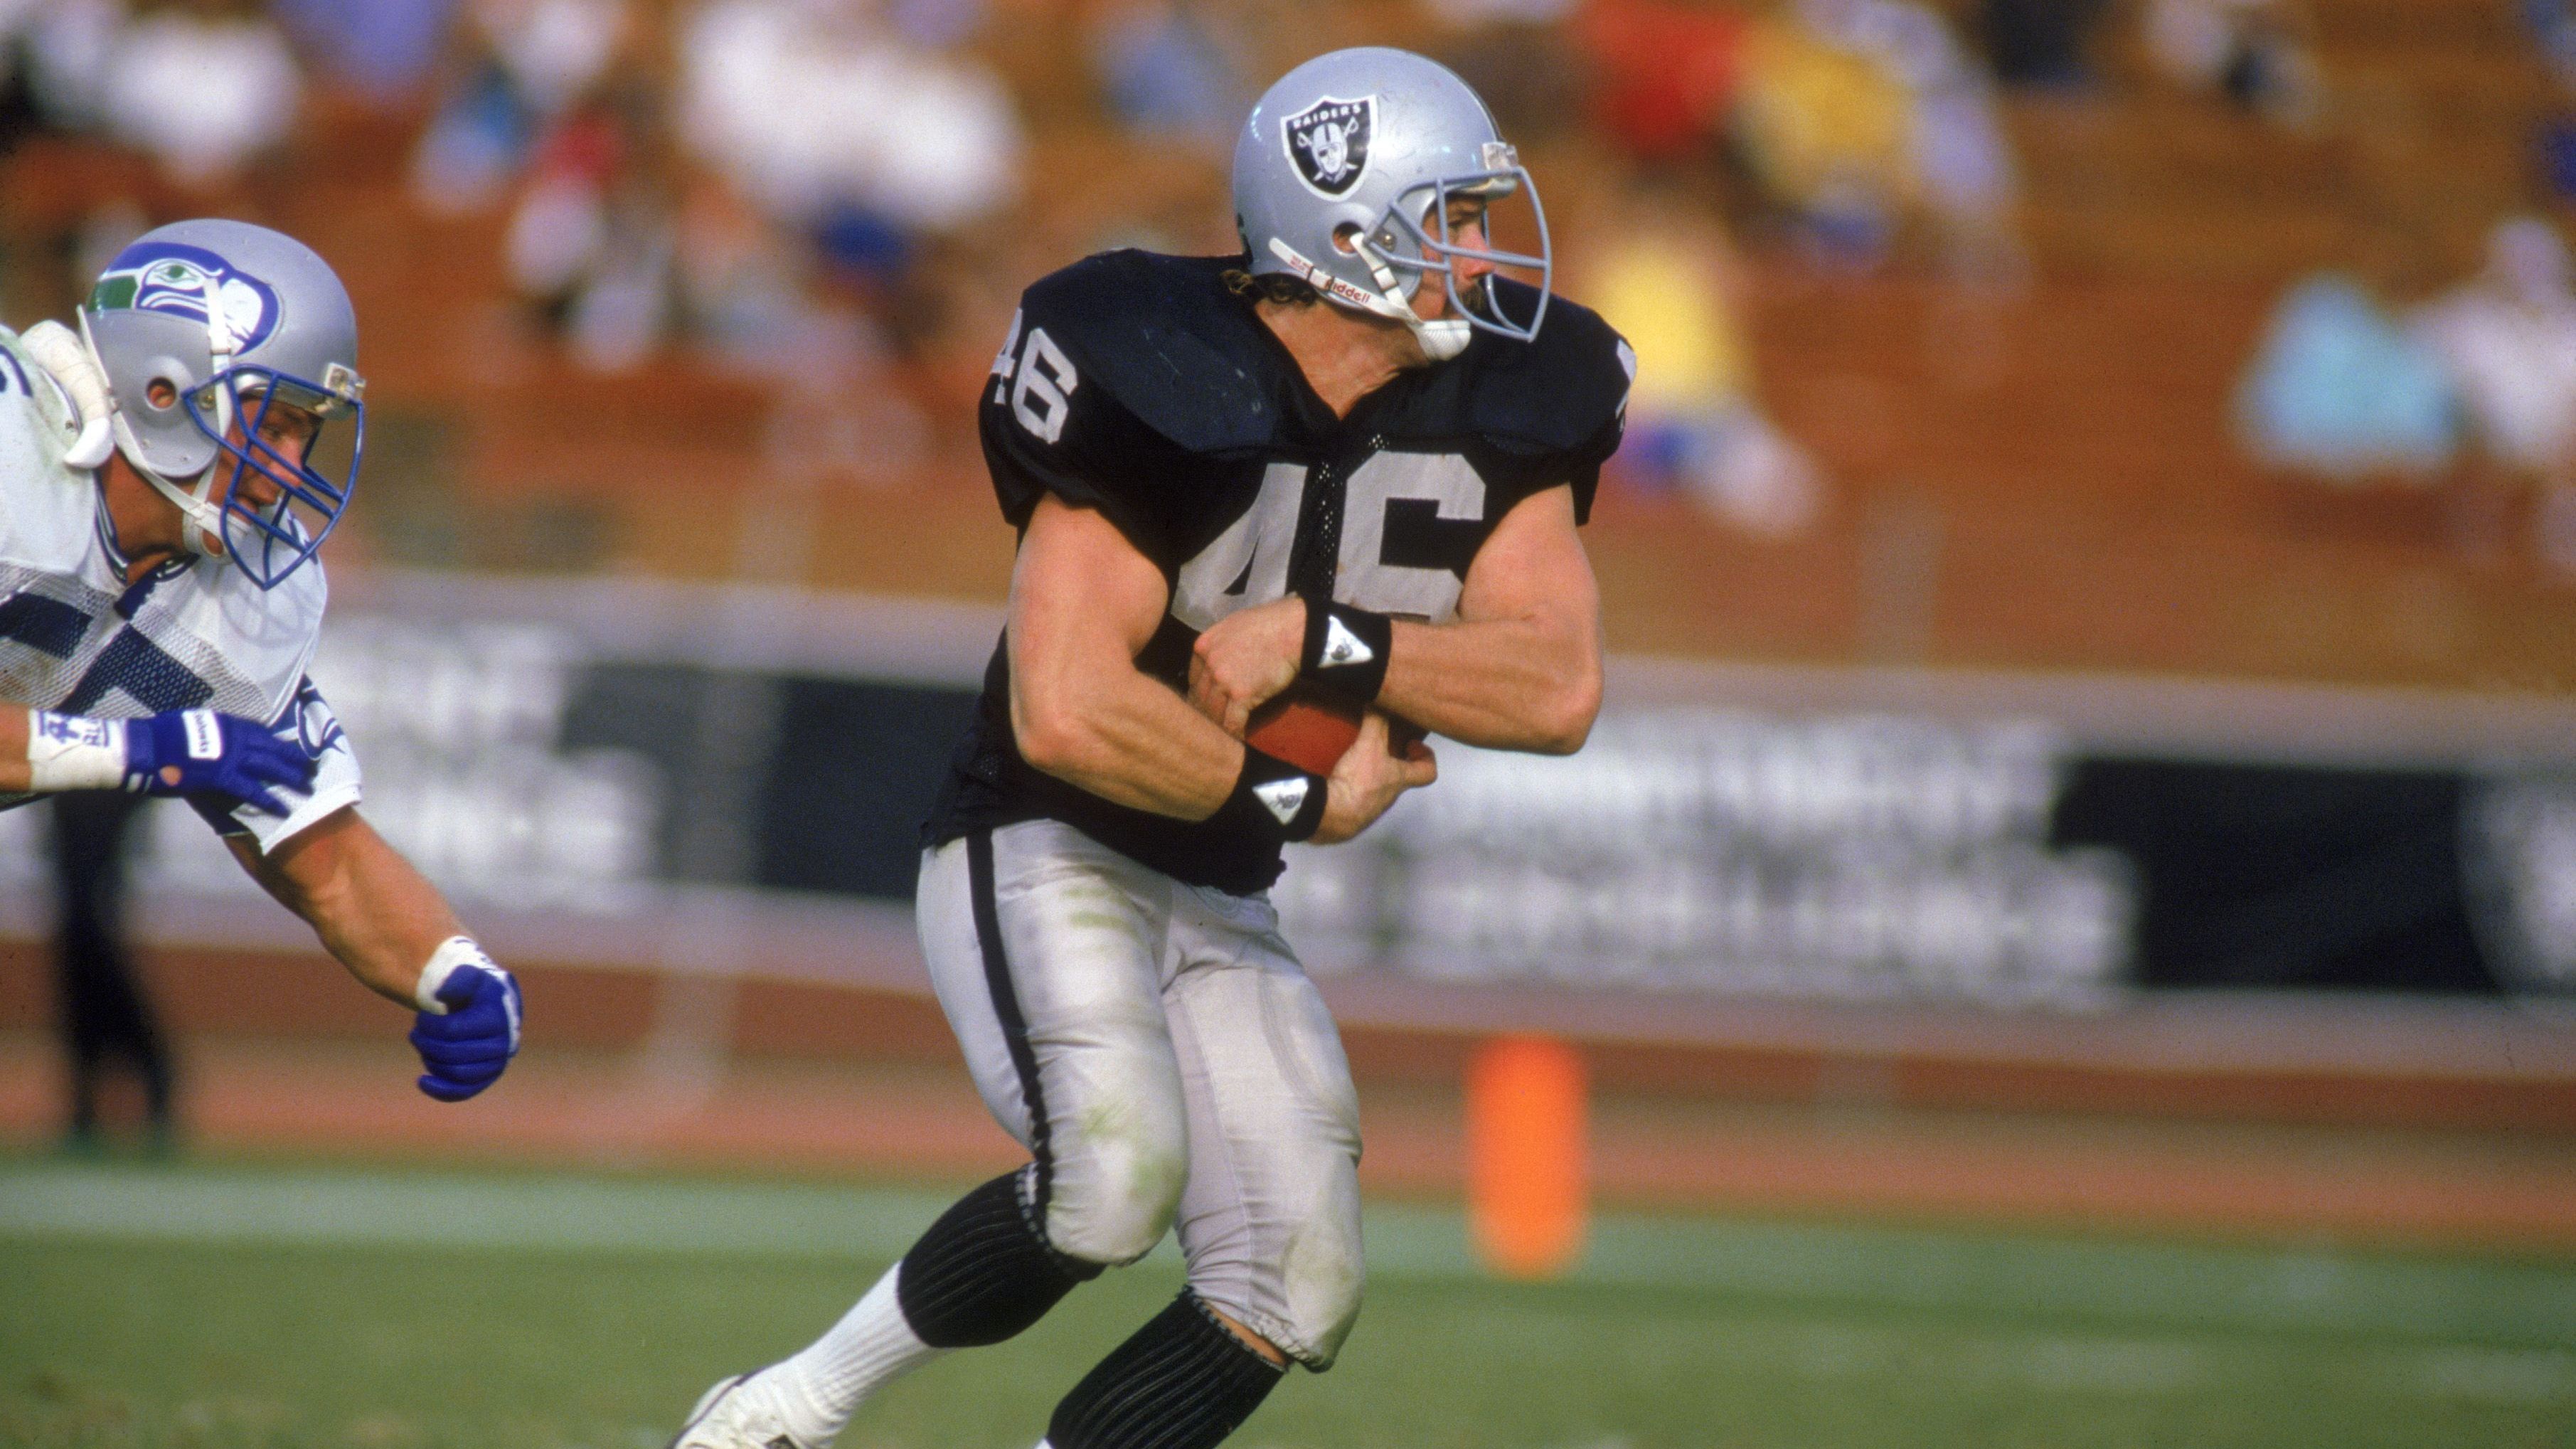 <strong>46: Todd Christensen</strong><br>Teams: New York Giants, Oakland/Los Angeles Raiders<br>Position: Tight End<br>Erfolge: Pro Football Hall of Famer, zweimaliger NFL-Champion, dreimaliger All-Pro, fünfmaliger Pro Bowler<br>Honorable Mentions: Tim McDonald